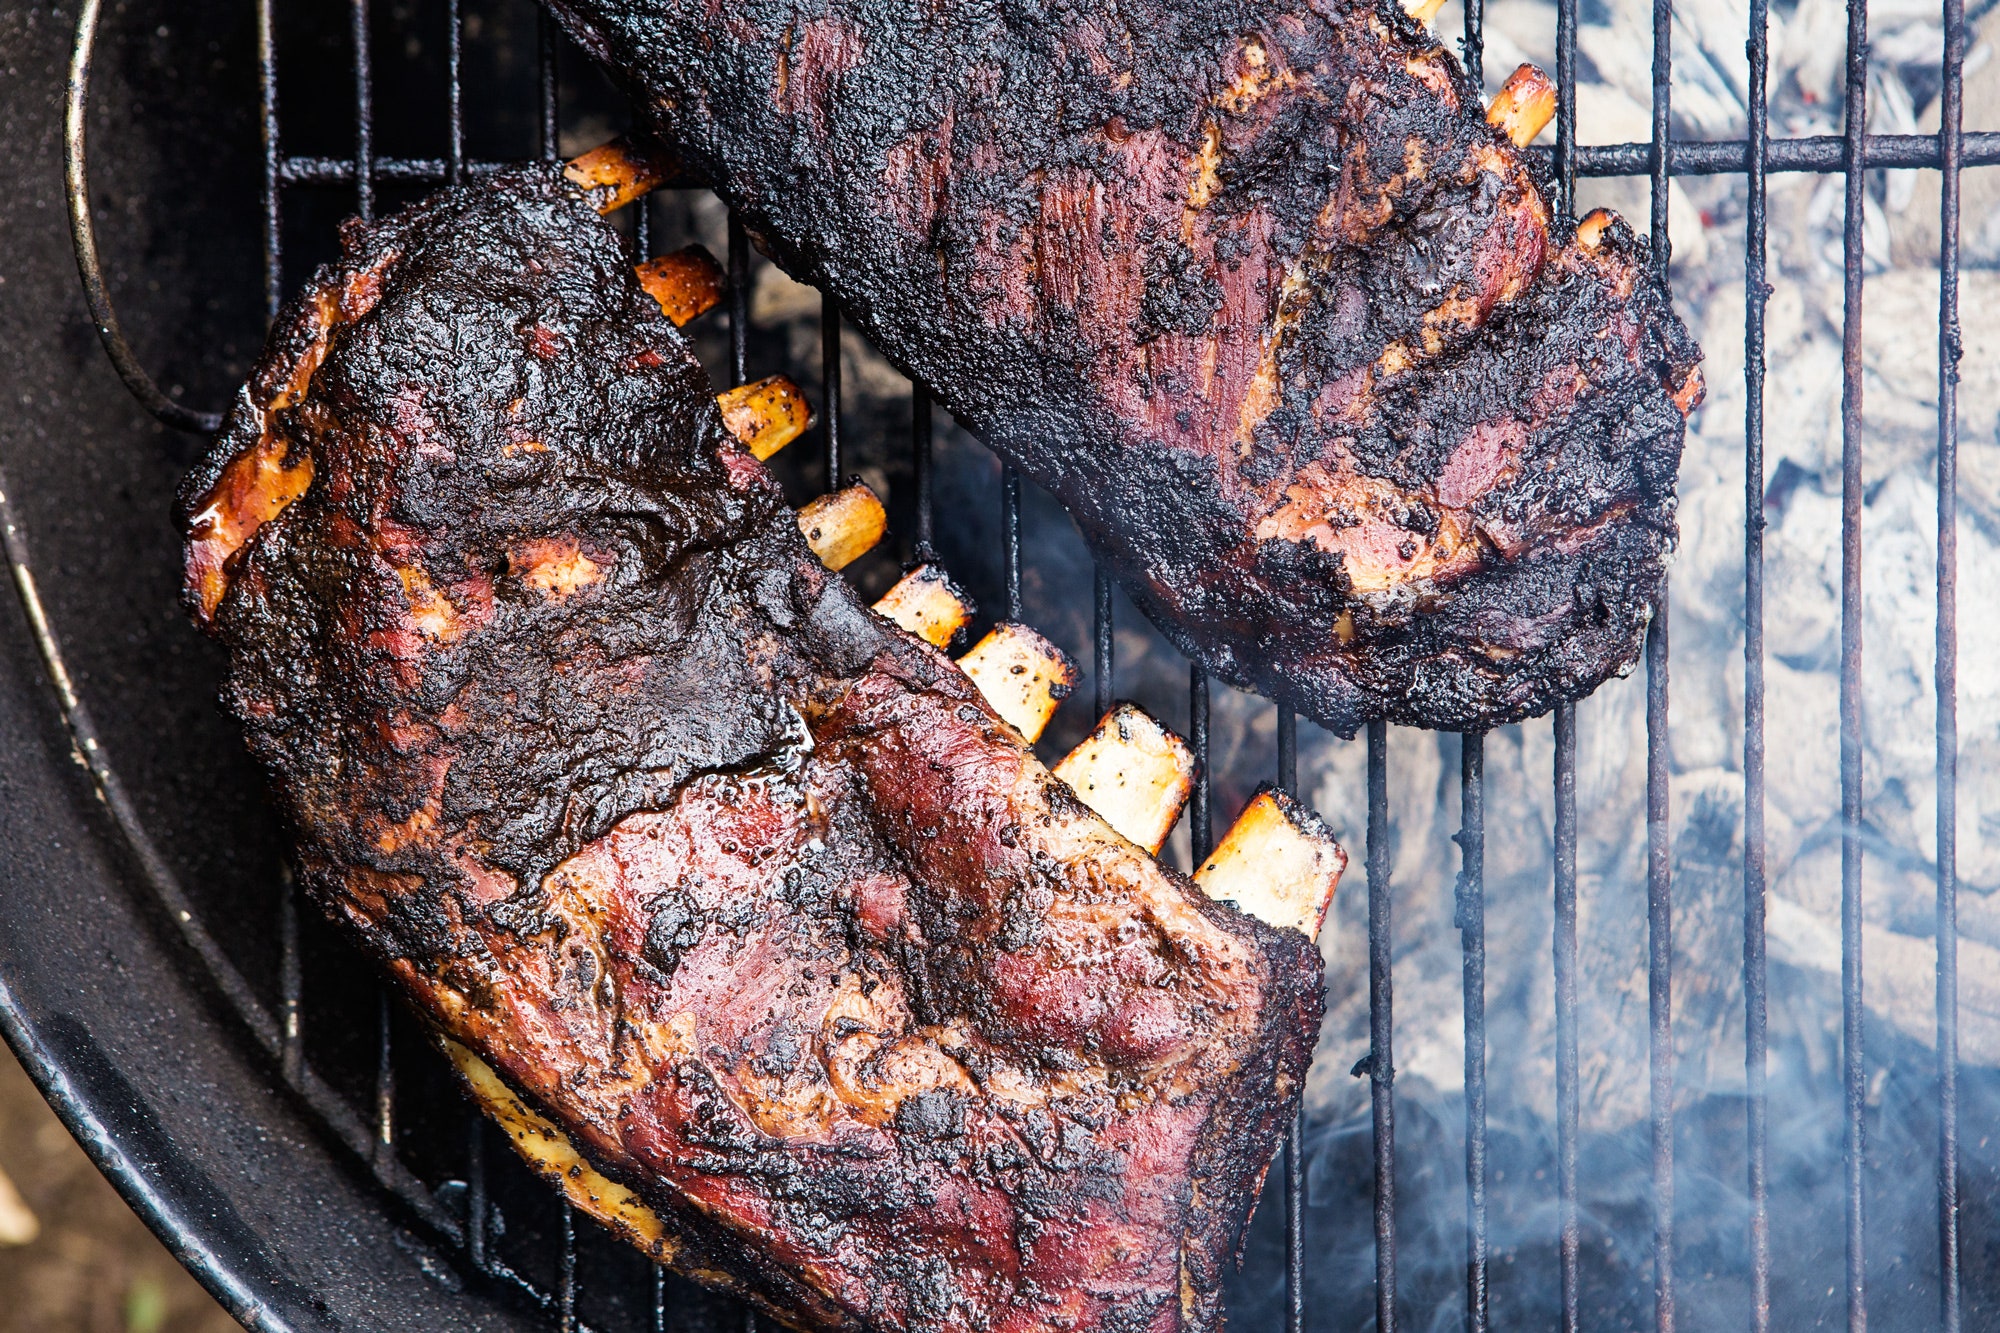 How to Make Beef Ribs
